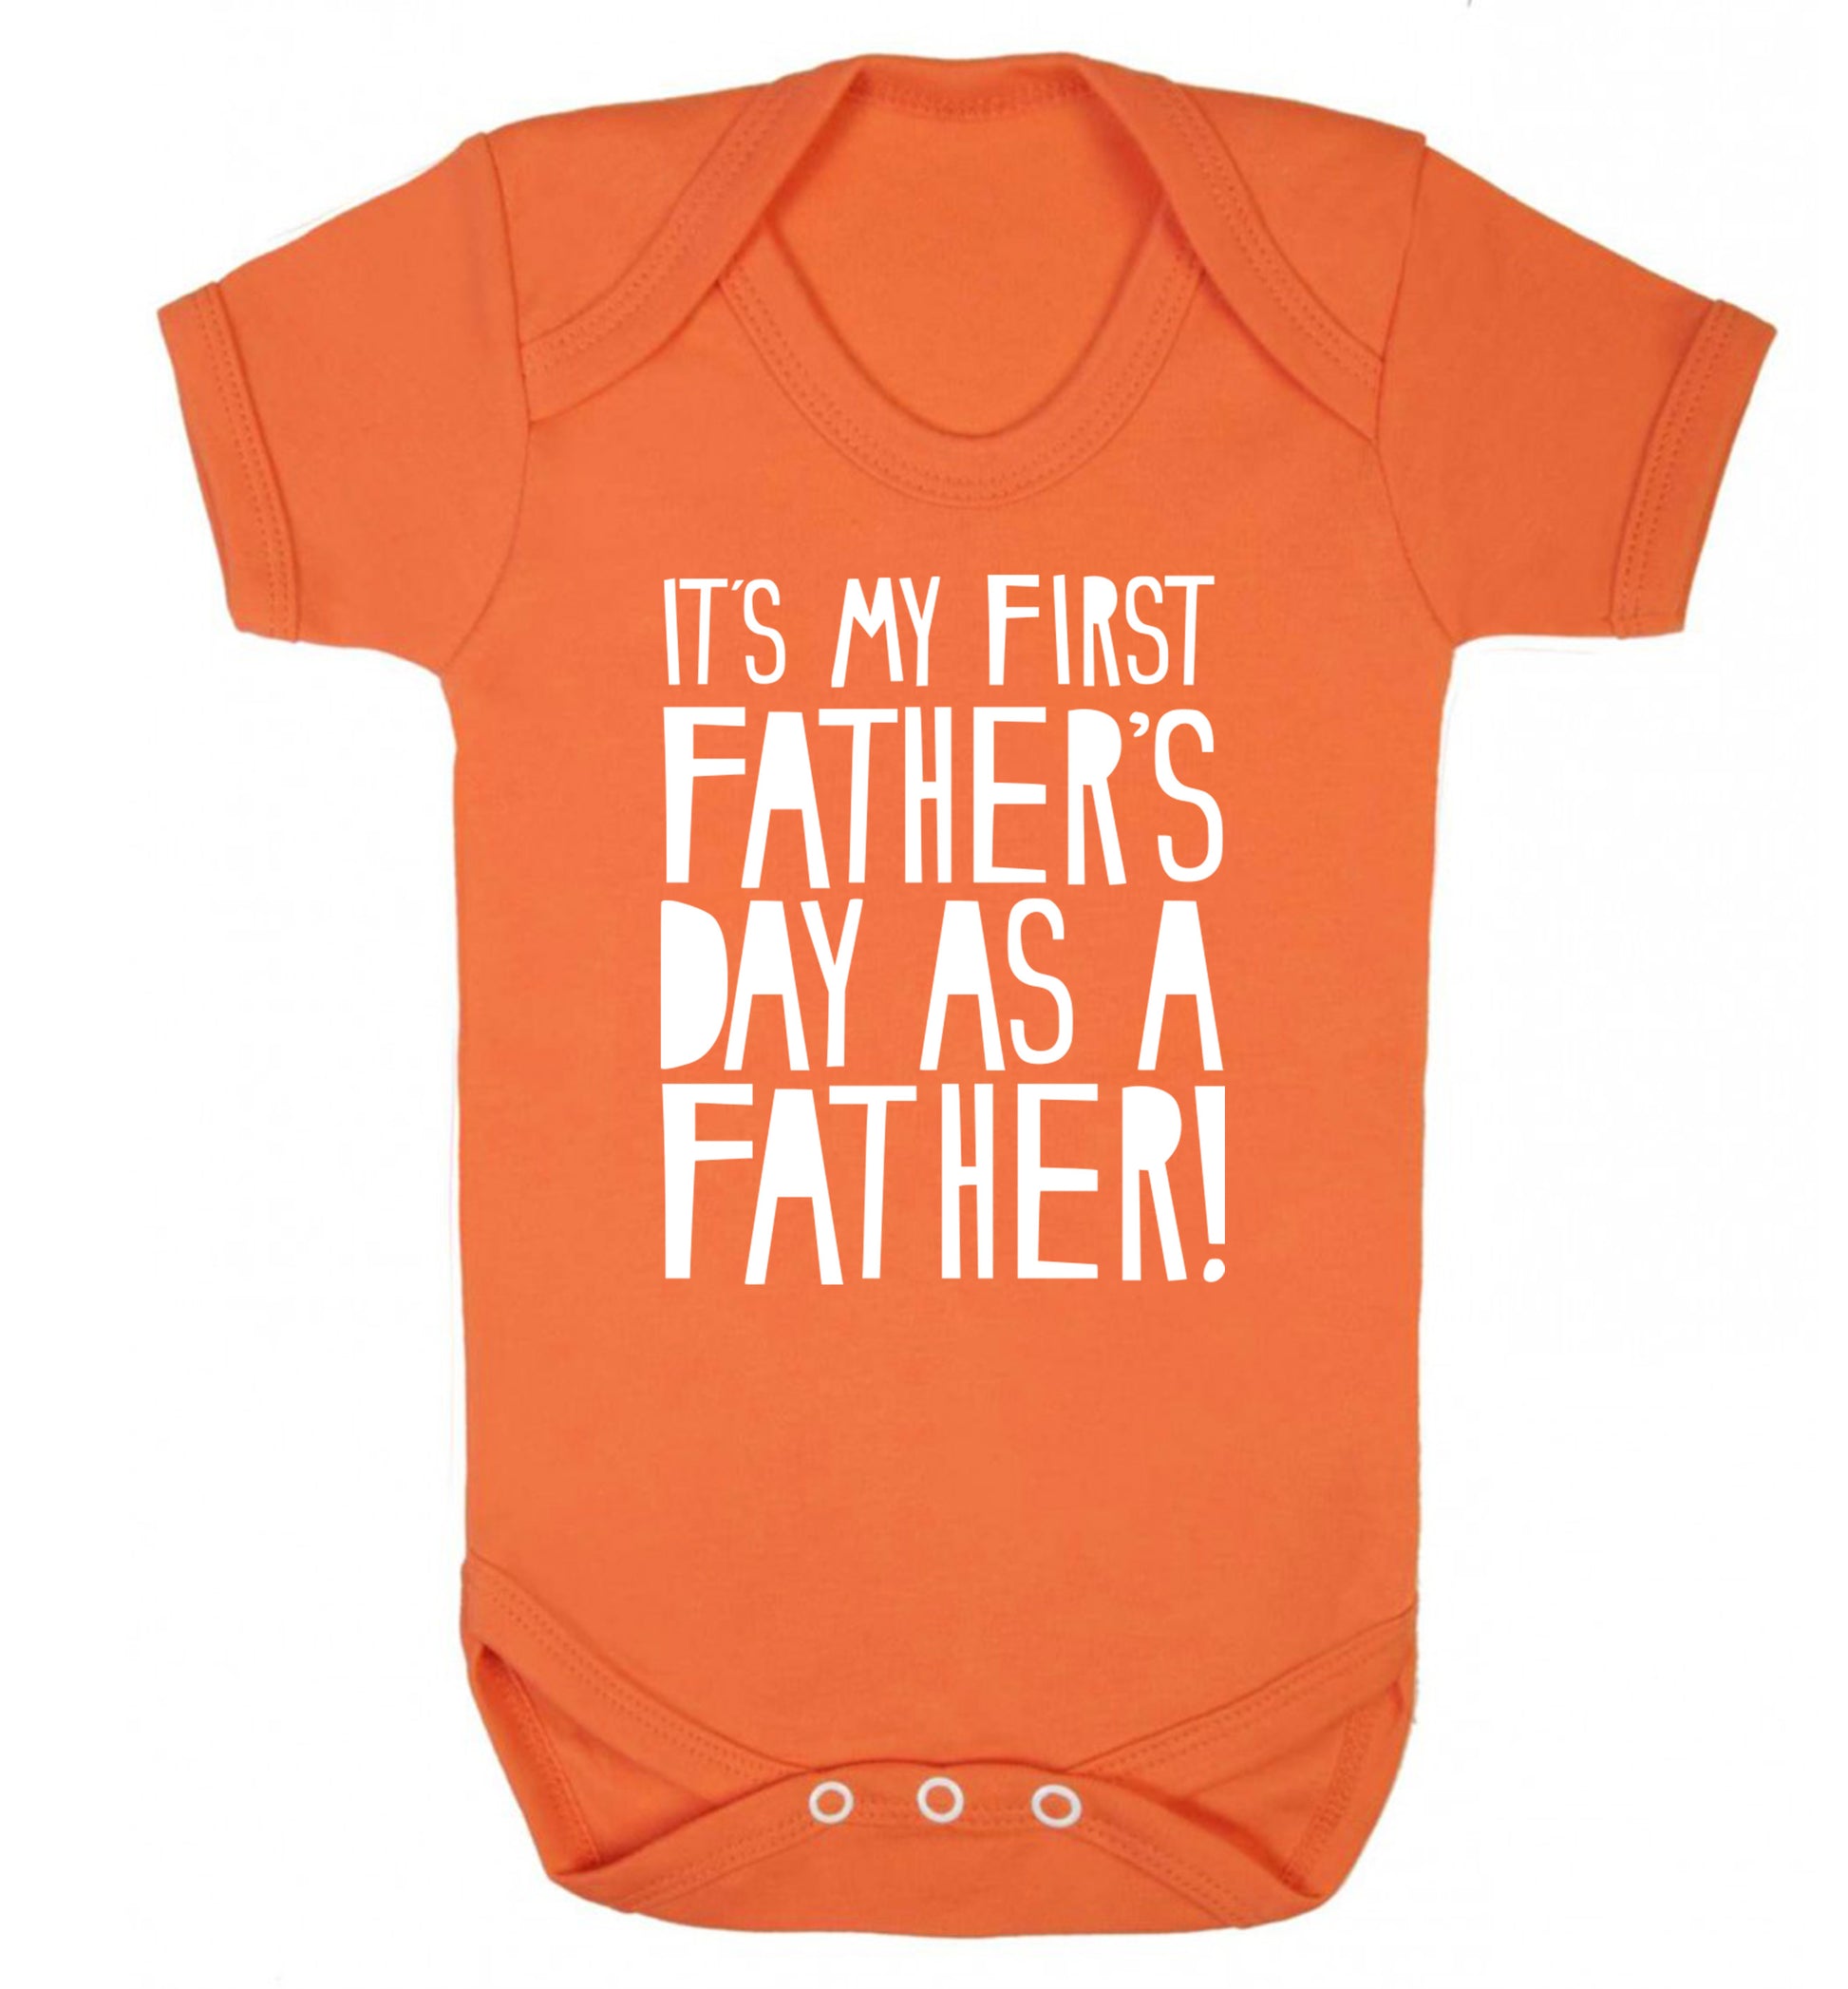 It's my first Father's Day as a father! Baby Vest orange 18-24 months